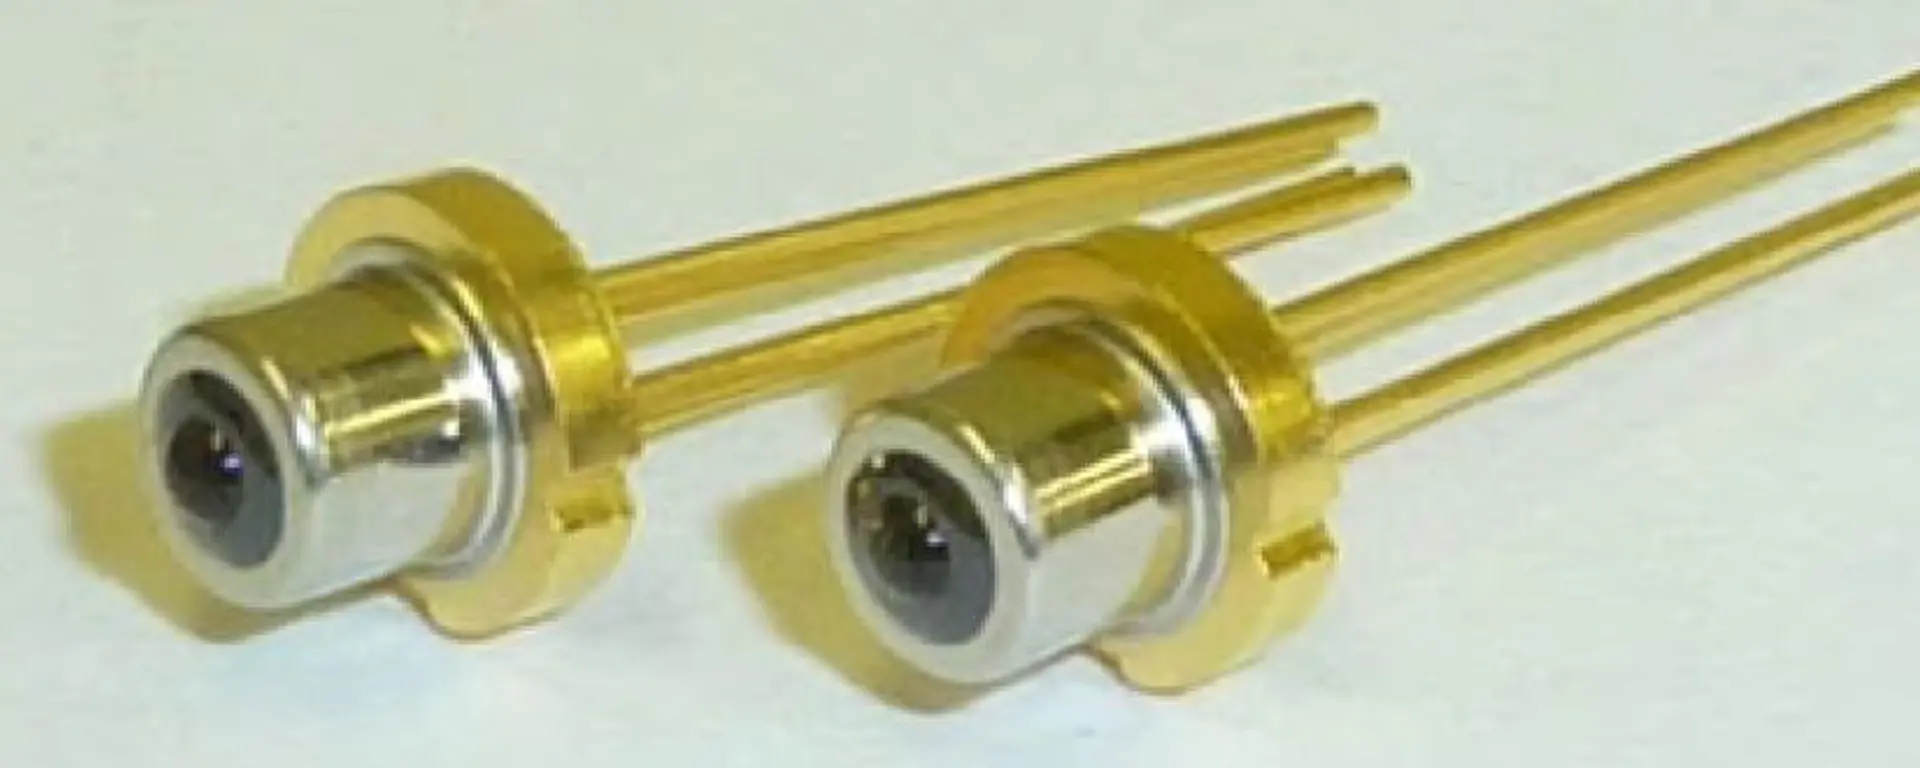 TO-style package laser diodes